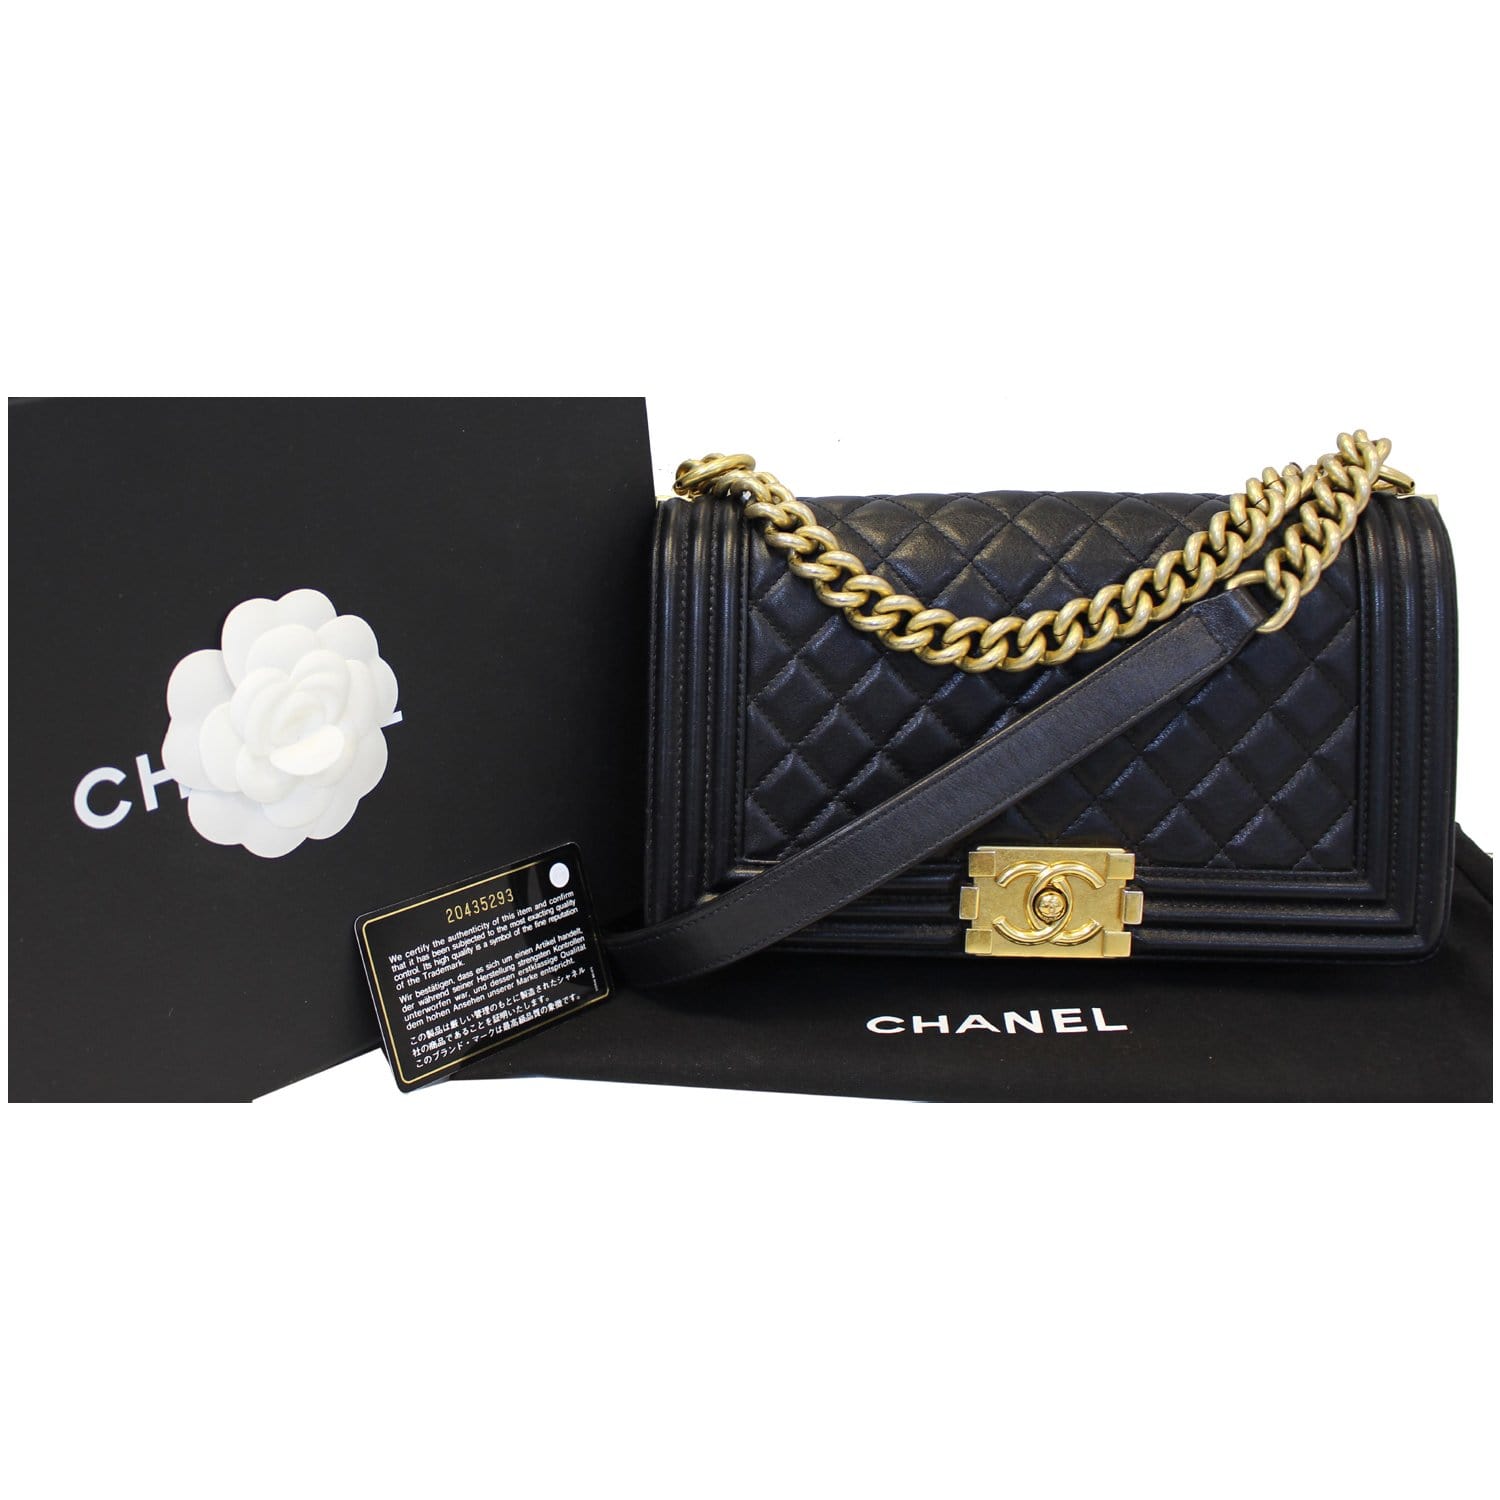 chanel black bag with gold chain used